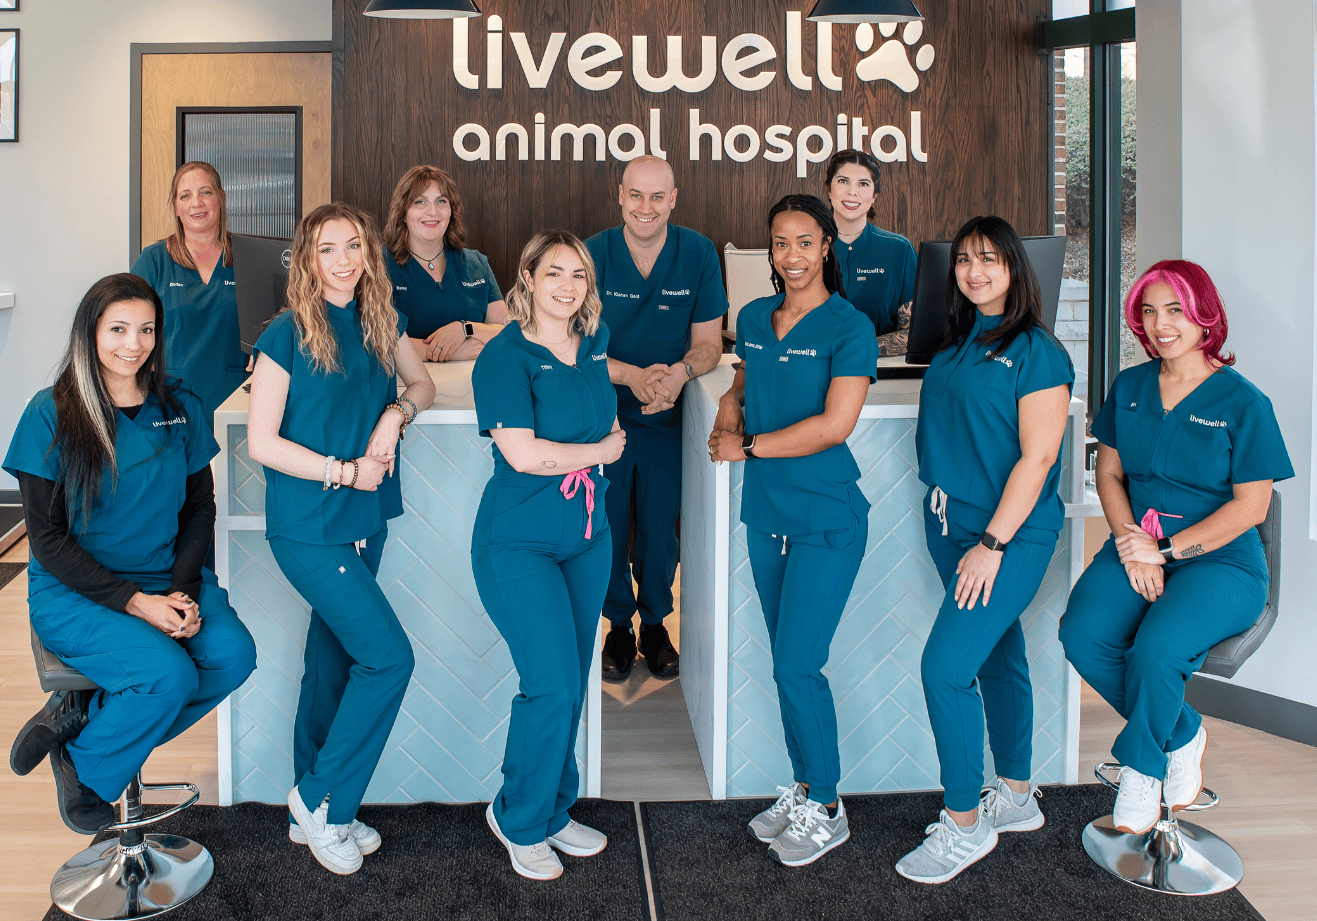 From left to right and back to front: Dorian, Betsy, Dr. Gold, Ashley, Dana, Faith, Tiffany, Dr. Jones, Gianna, and Brianna in front of receptionist area